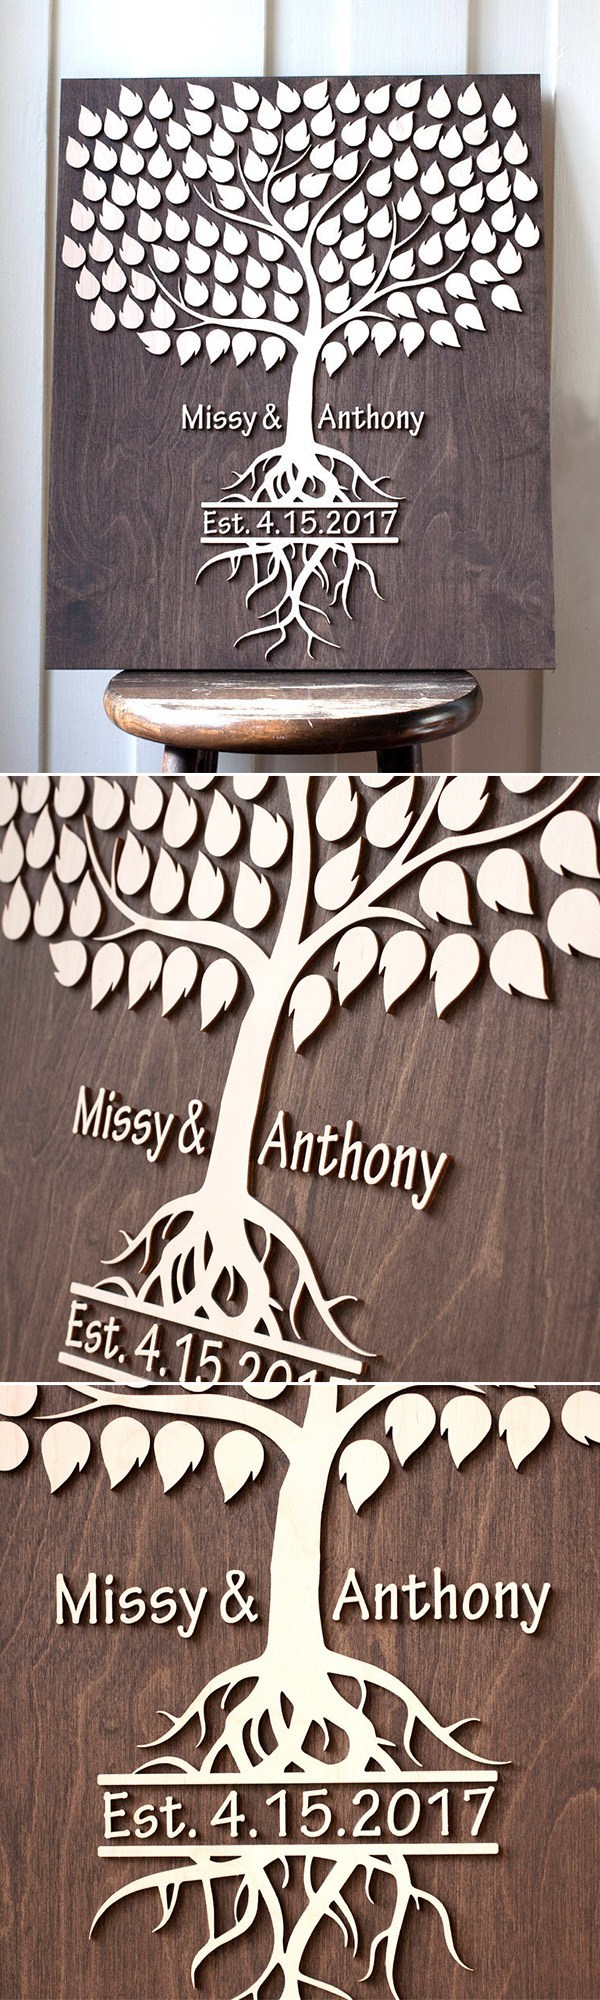 14 Wedding Tree Rustic Guestbook alternatives for guest book at wedding Rustic Wedding